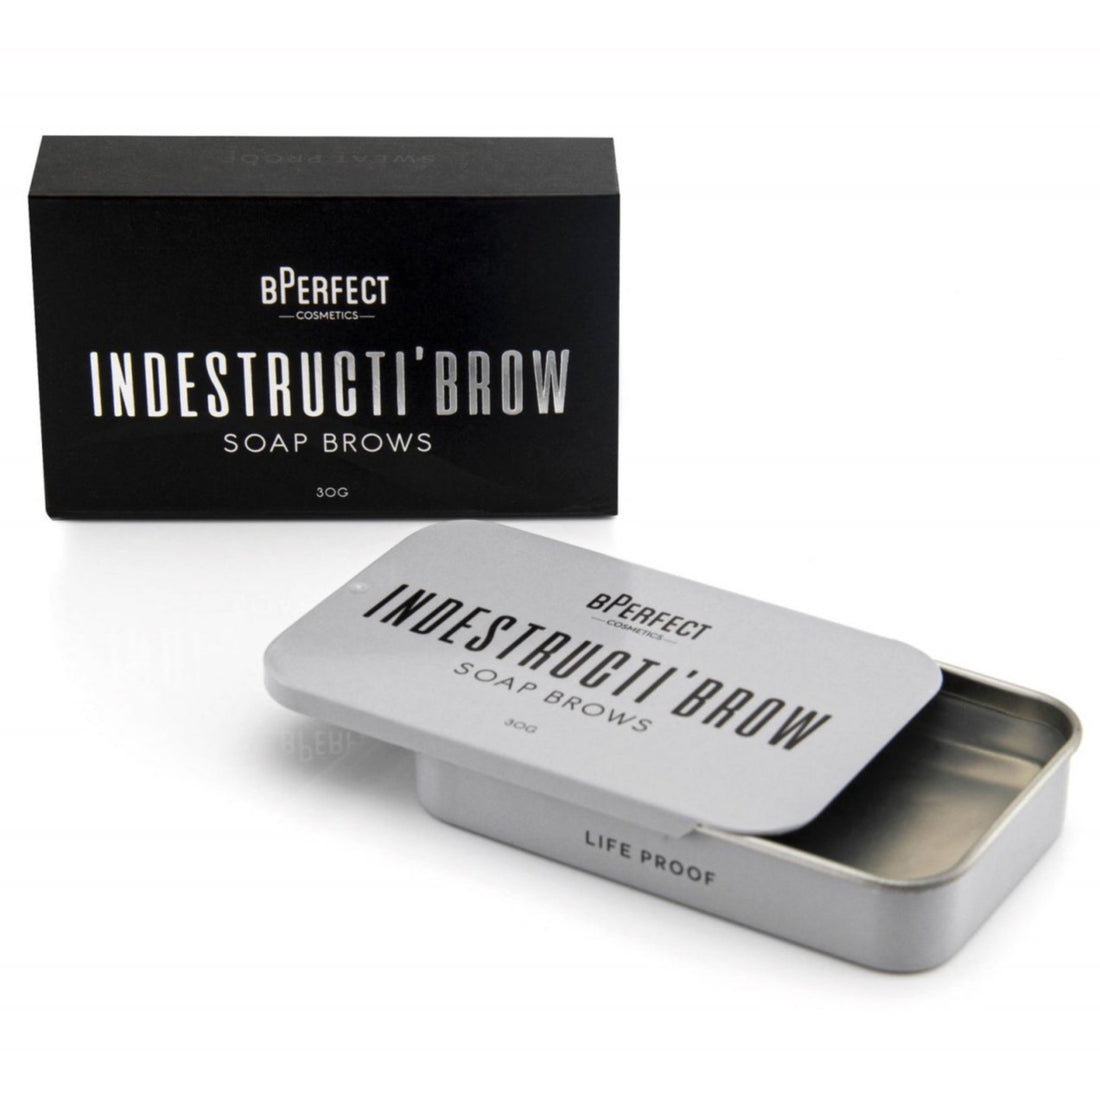 bPerfect INDESTRUCTI’BROW SOAP BROWS, with packaging